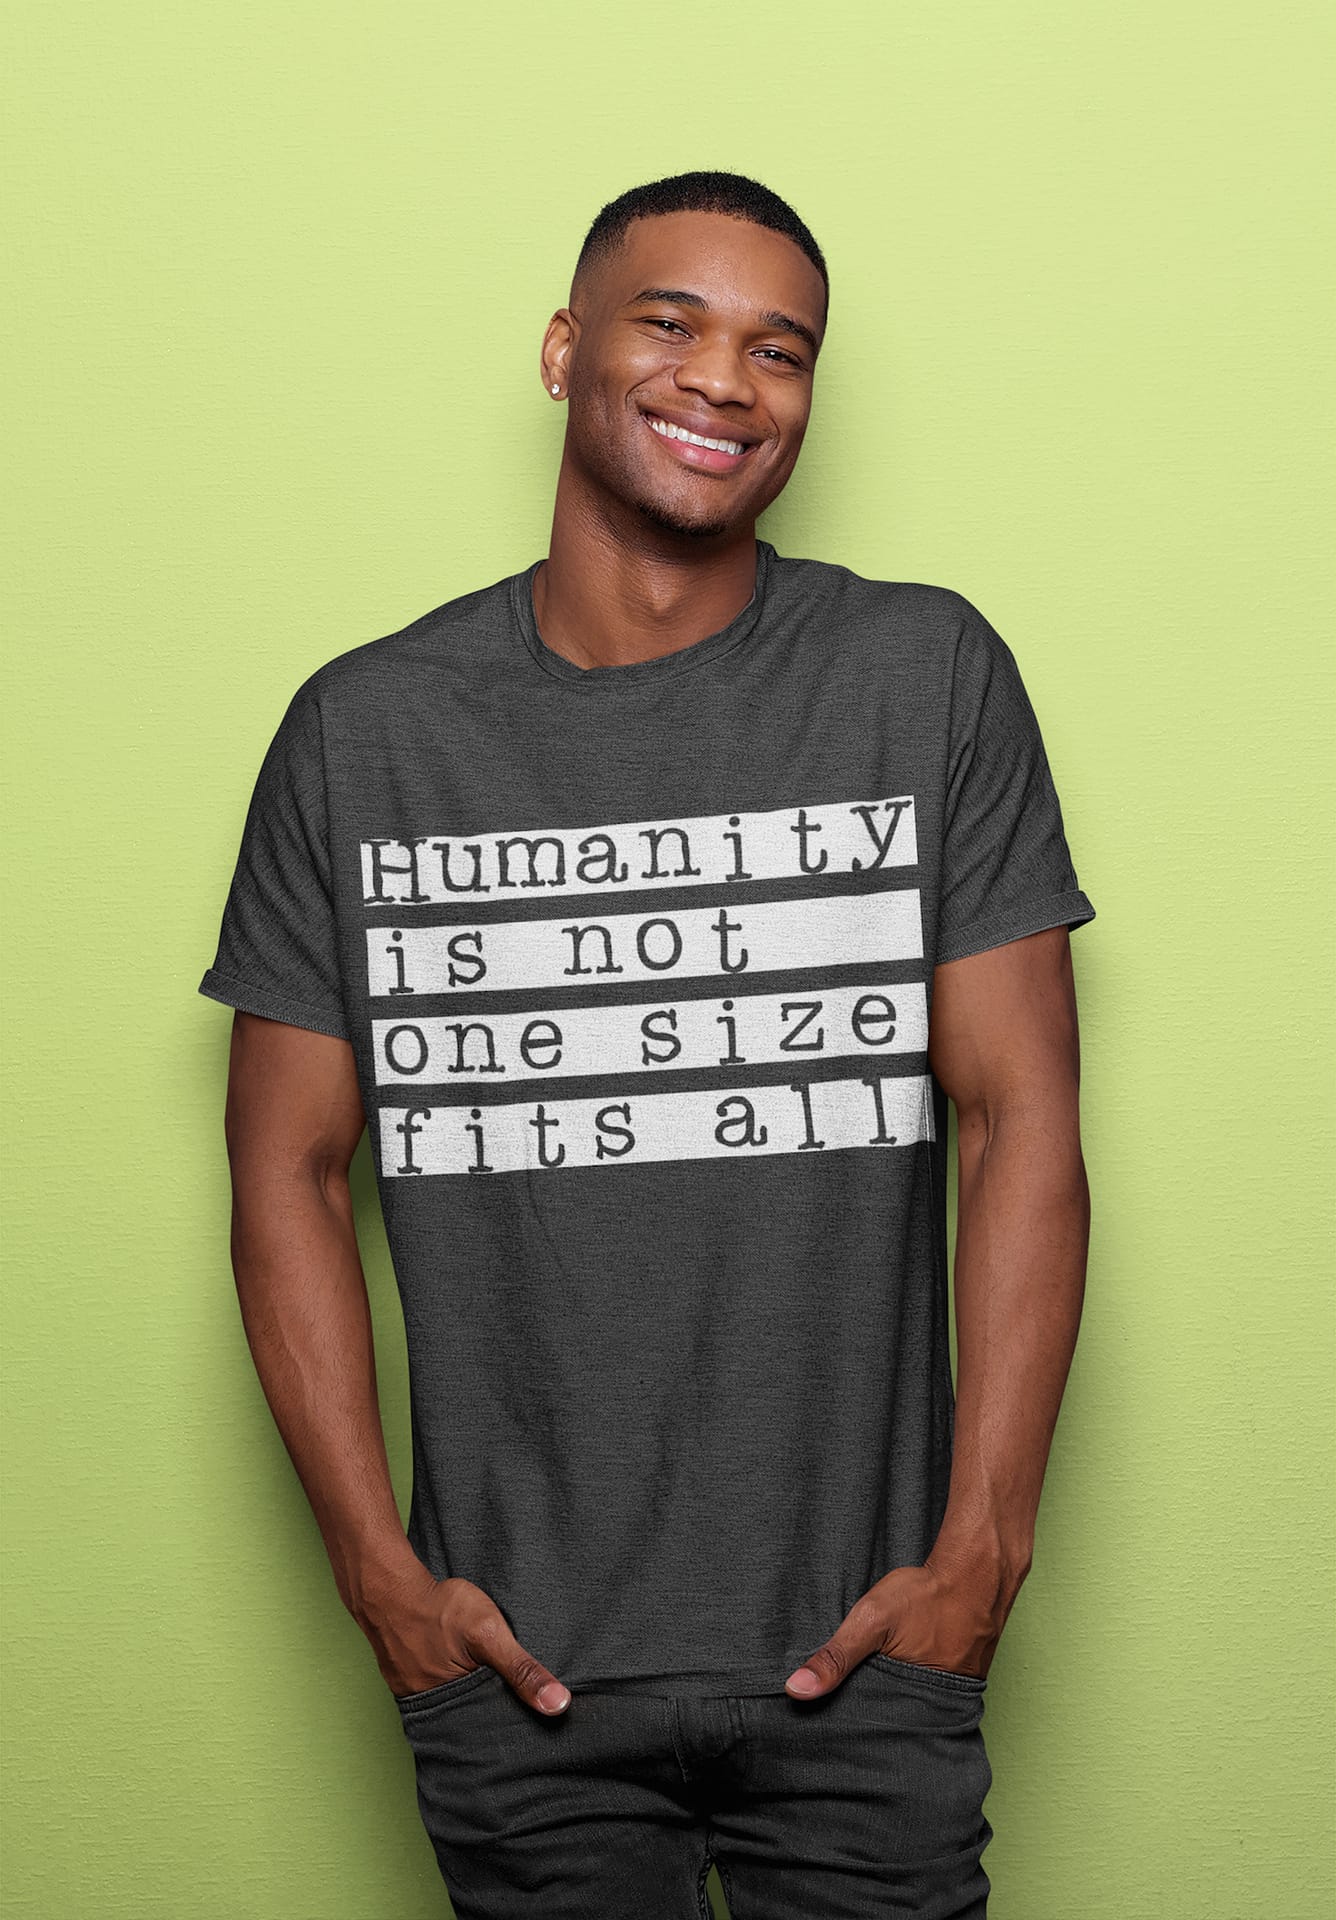 Perfectly Queer Humanity Isnt One Size Fits All TShirt White Text 3